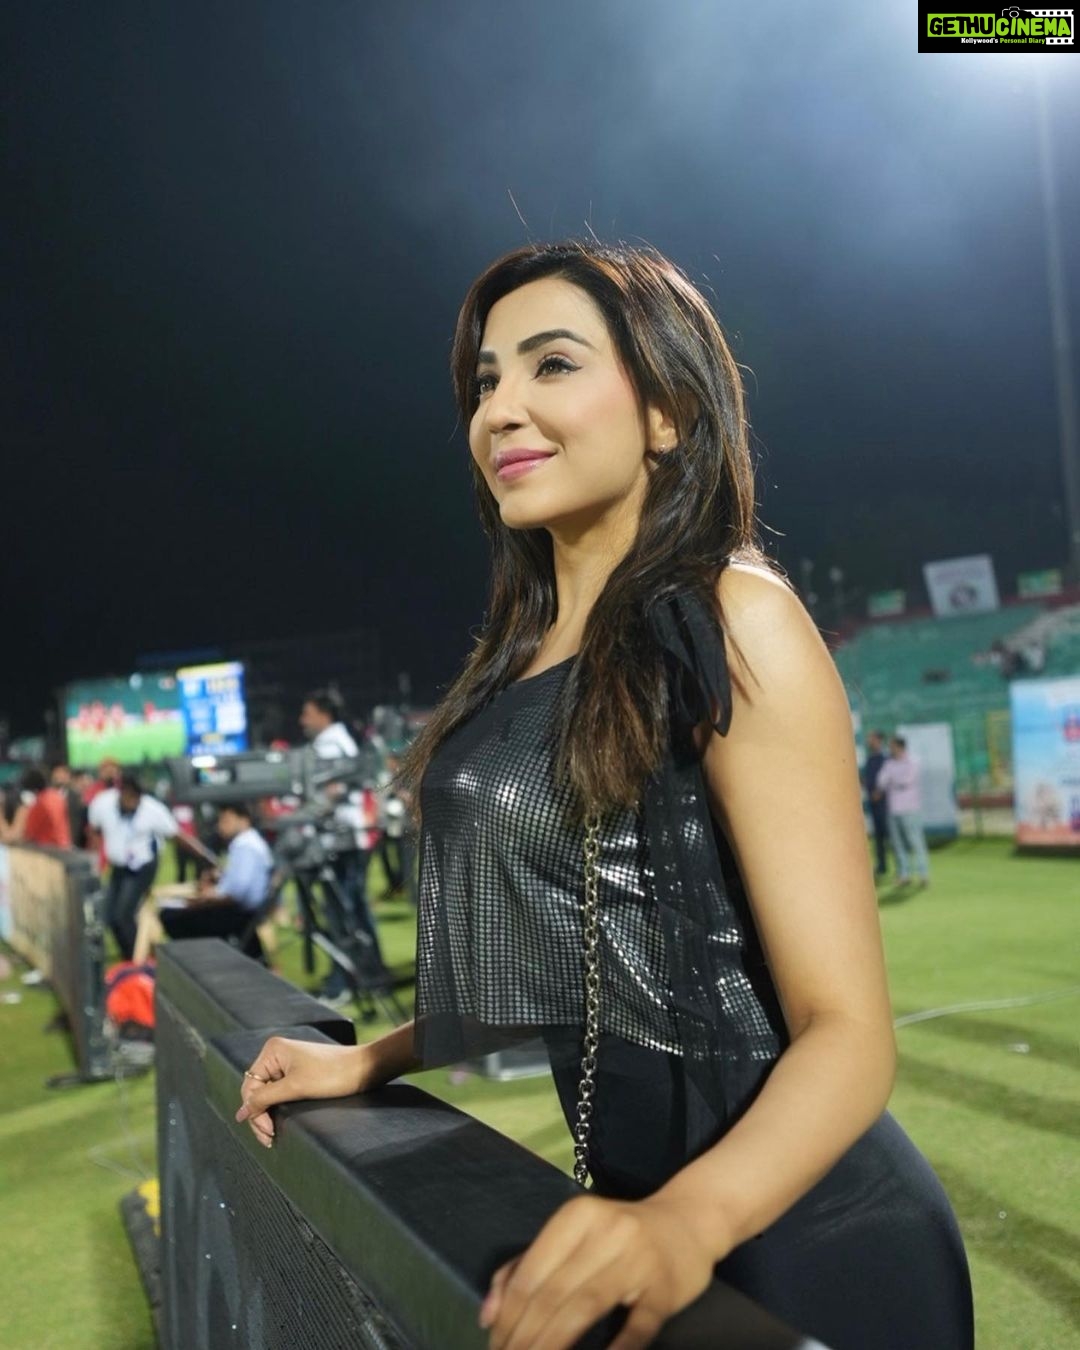 Parvatii Nair - 97K Likes - Most Liked Instagram Photos